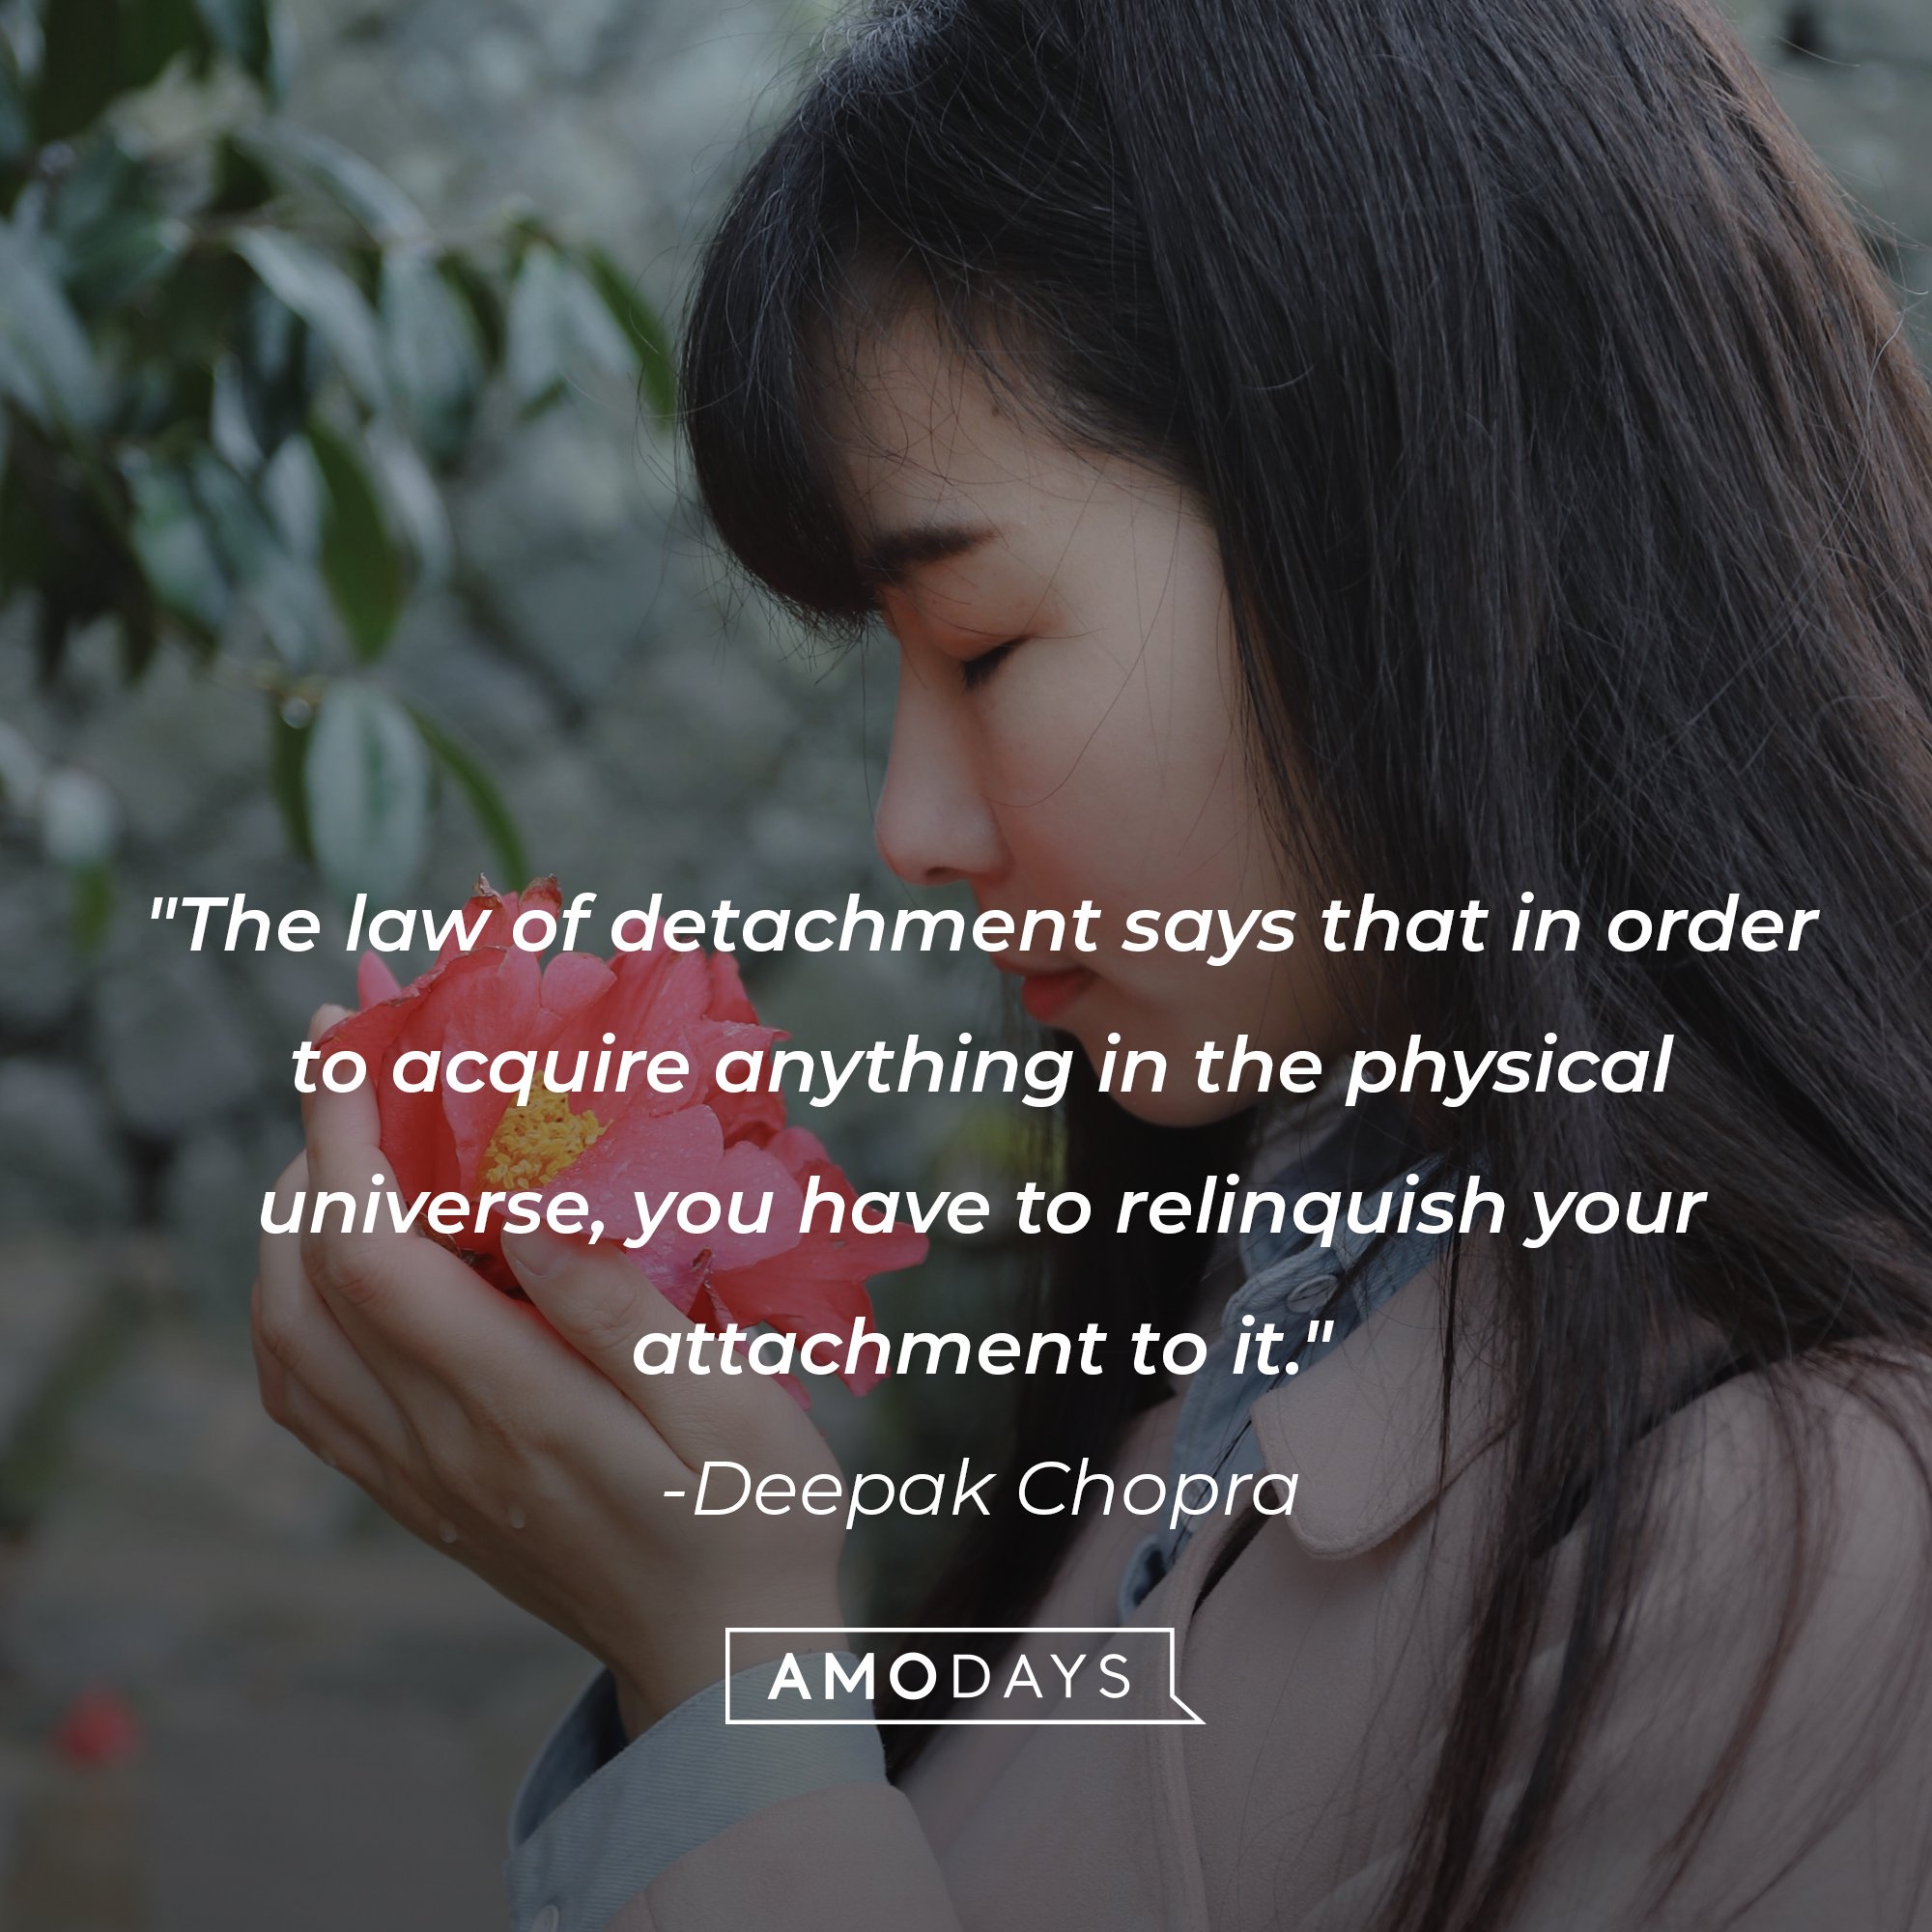 Deepak Chopra's quote: "The law of detachment says that in order to acquire anything in the physical universe, you have to relinquish your attachment to it." | Image: AmoDays